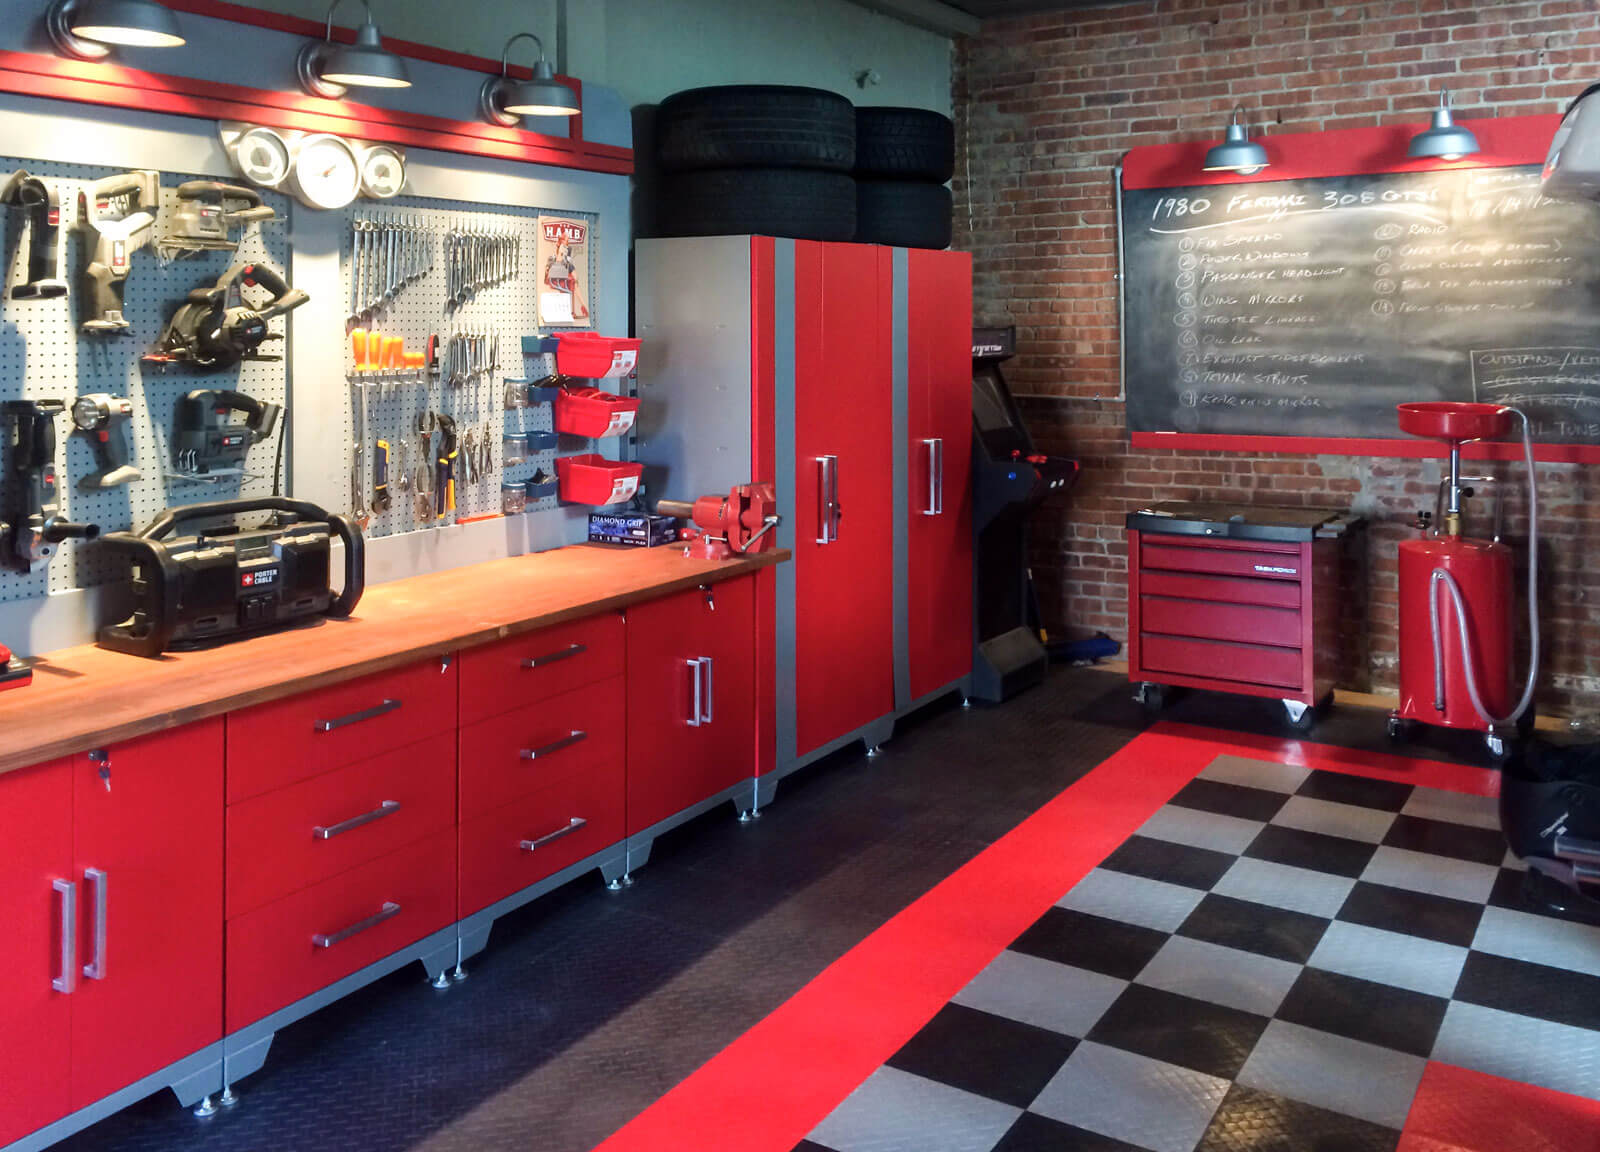 RaceDeck Diamond Garage flooring in a custom pattern fits this home shop perfectly.